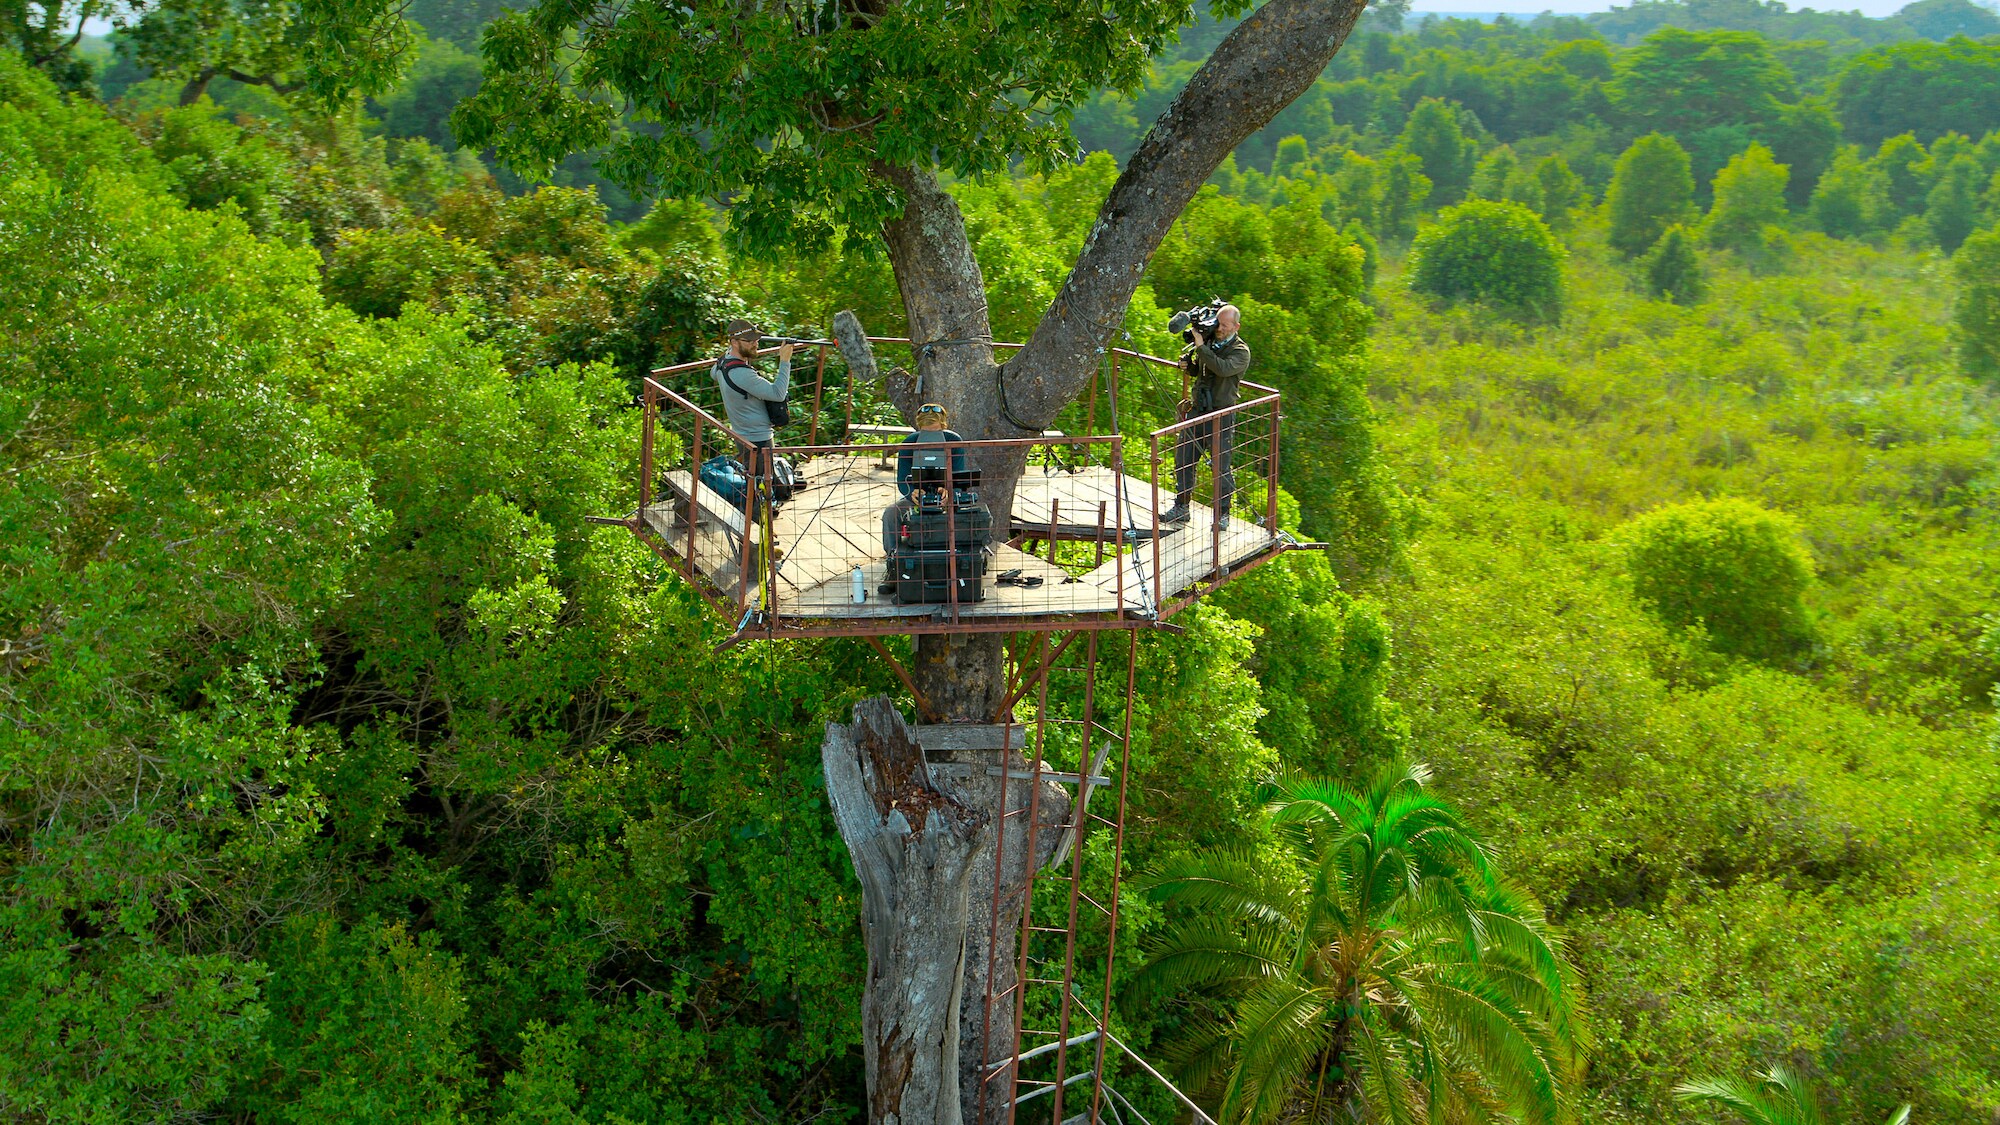 The team film Bertie Gregory high up in the tree tops as he flies his drone to get the epic shot. (Credit: National Geographic/Bertie Gregory for Disney+)